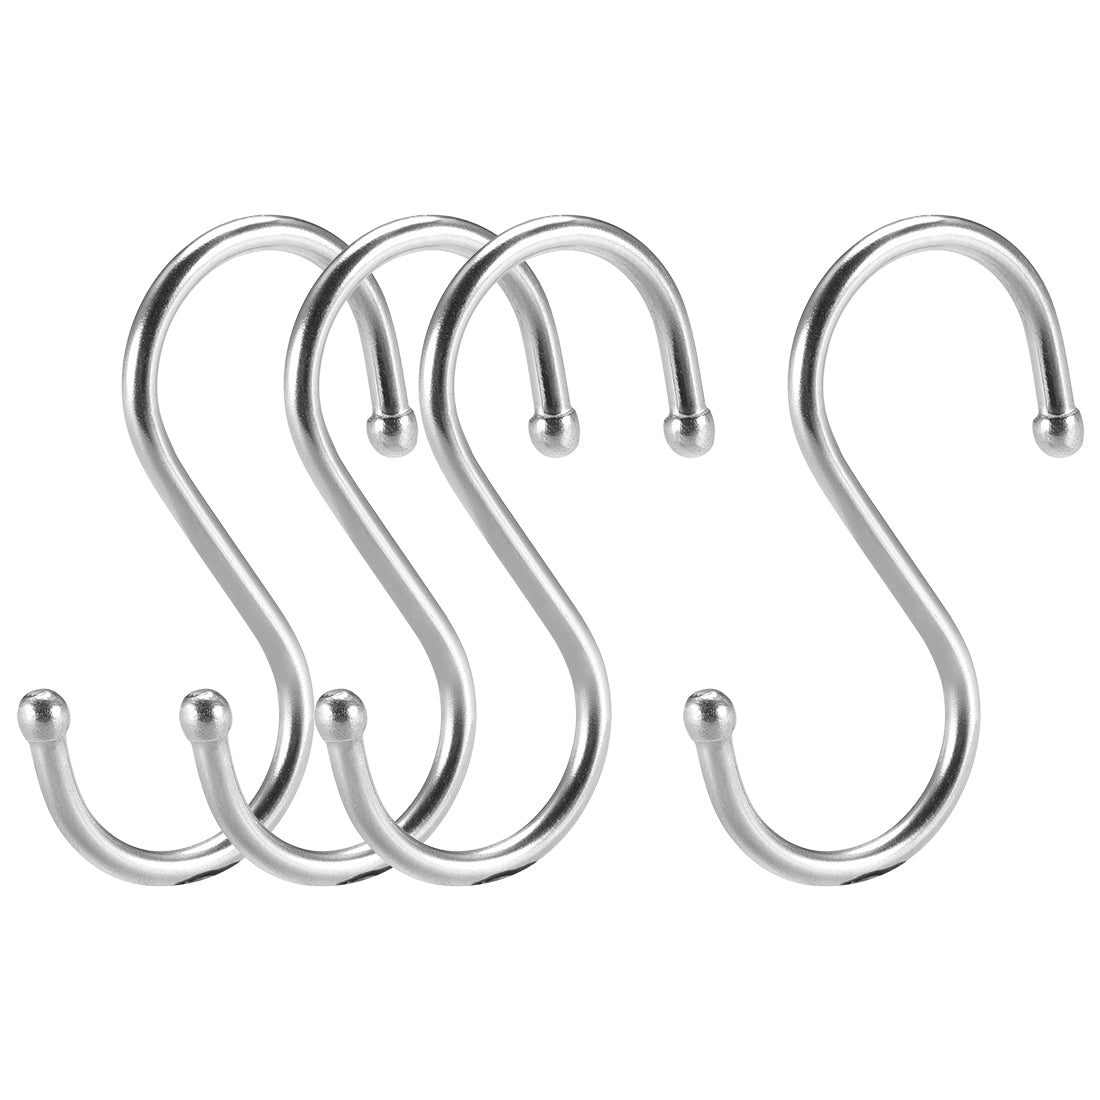 uxcell Uxcell Stainless Steel S Hooks 2" S Shaped Hook Hangers 4pcs